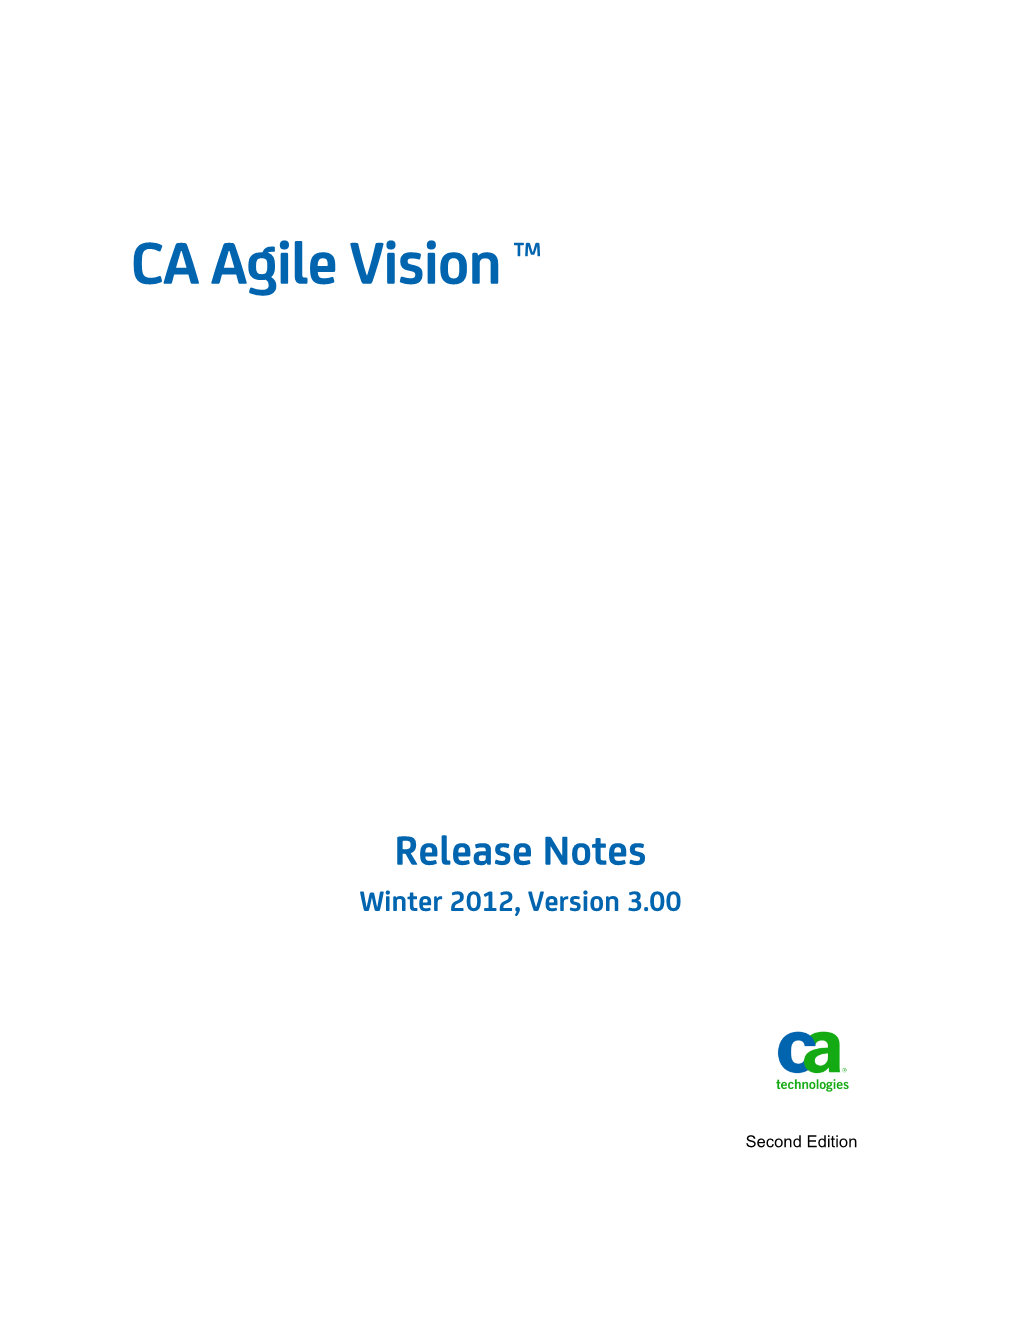 CA Agile Vision Release Notes